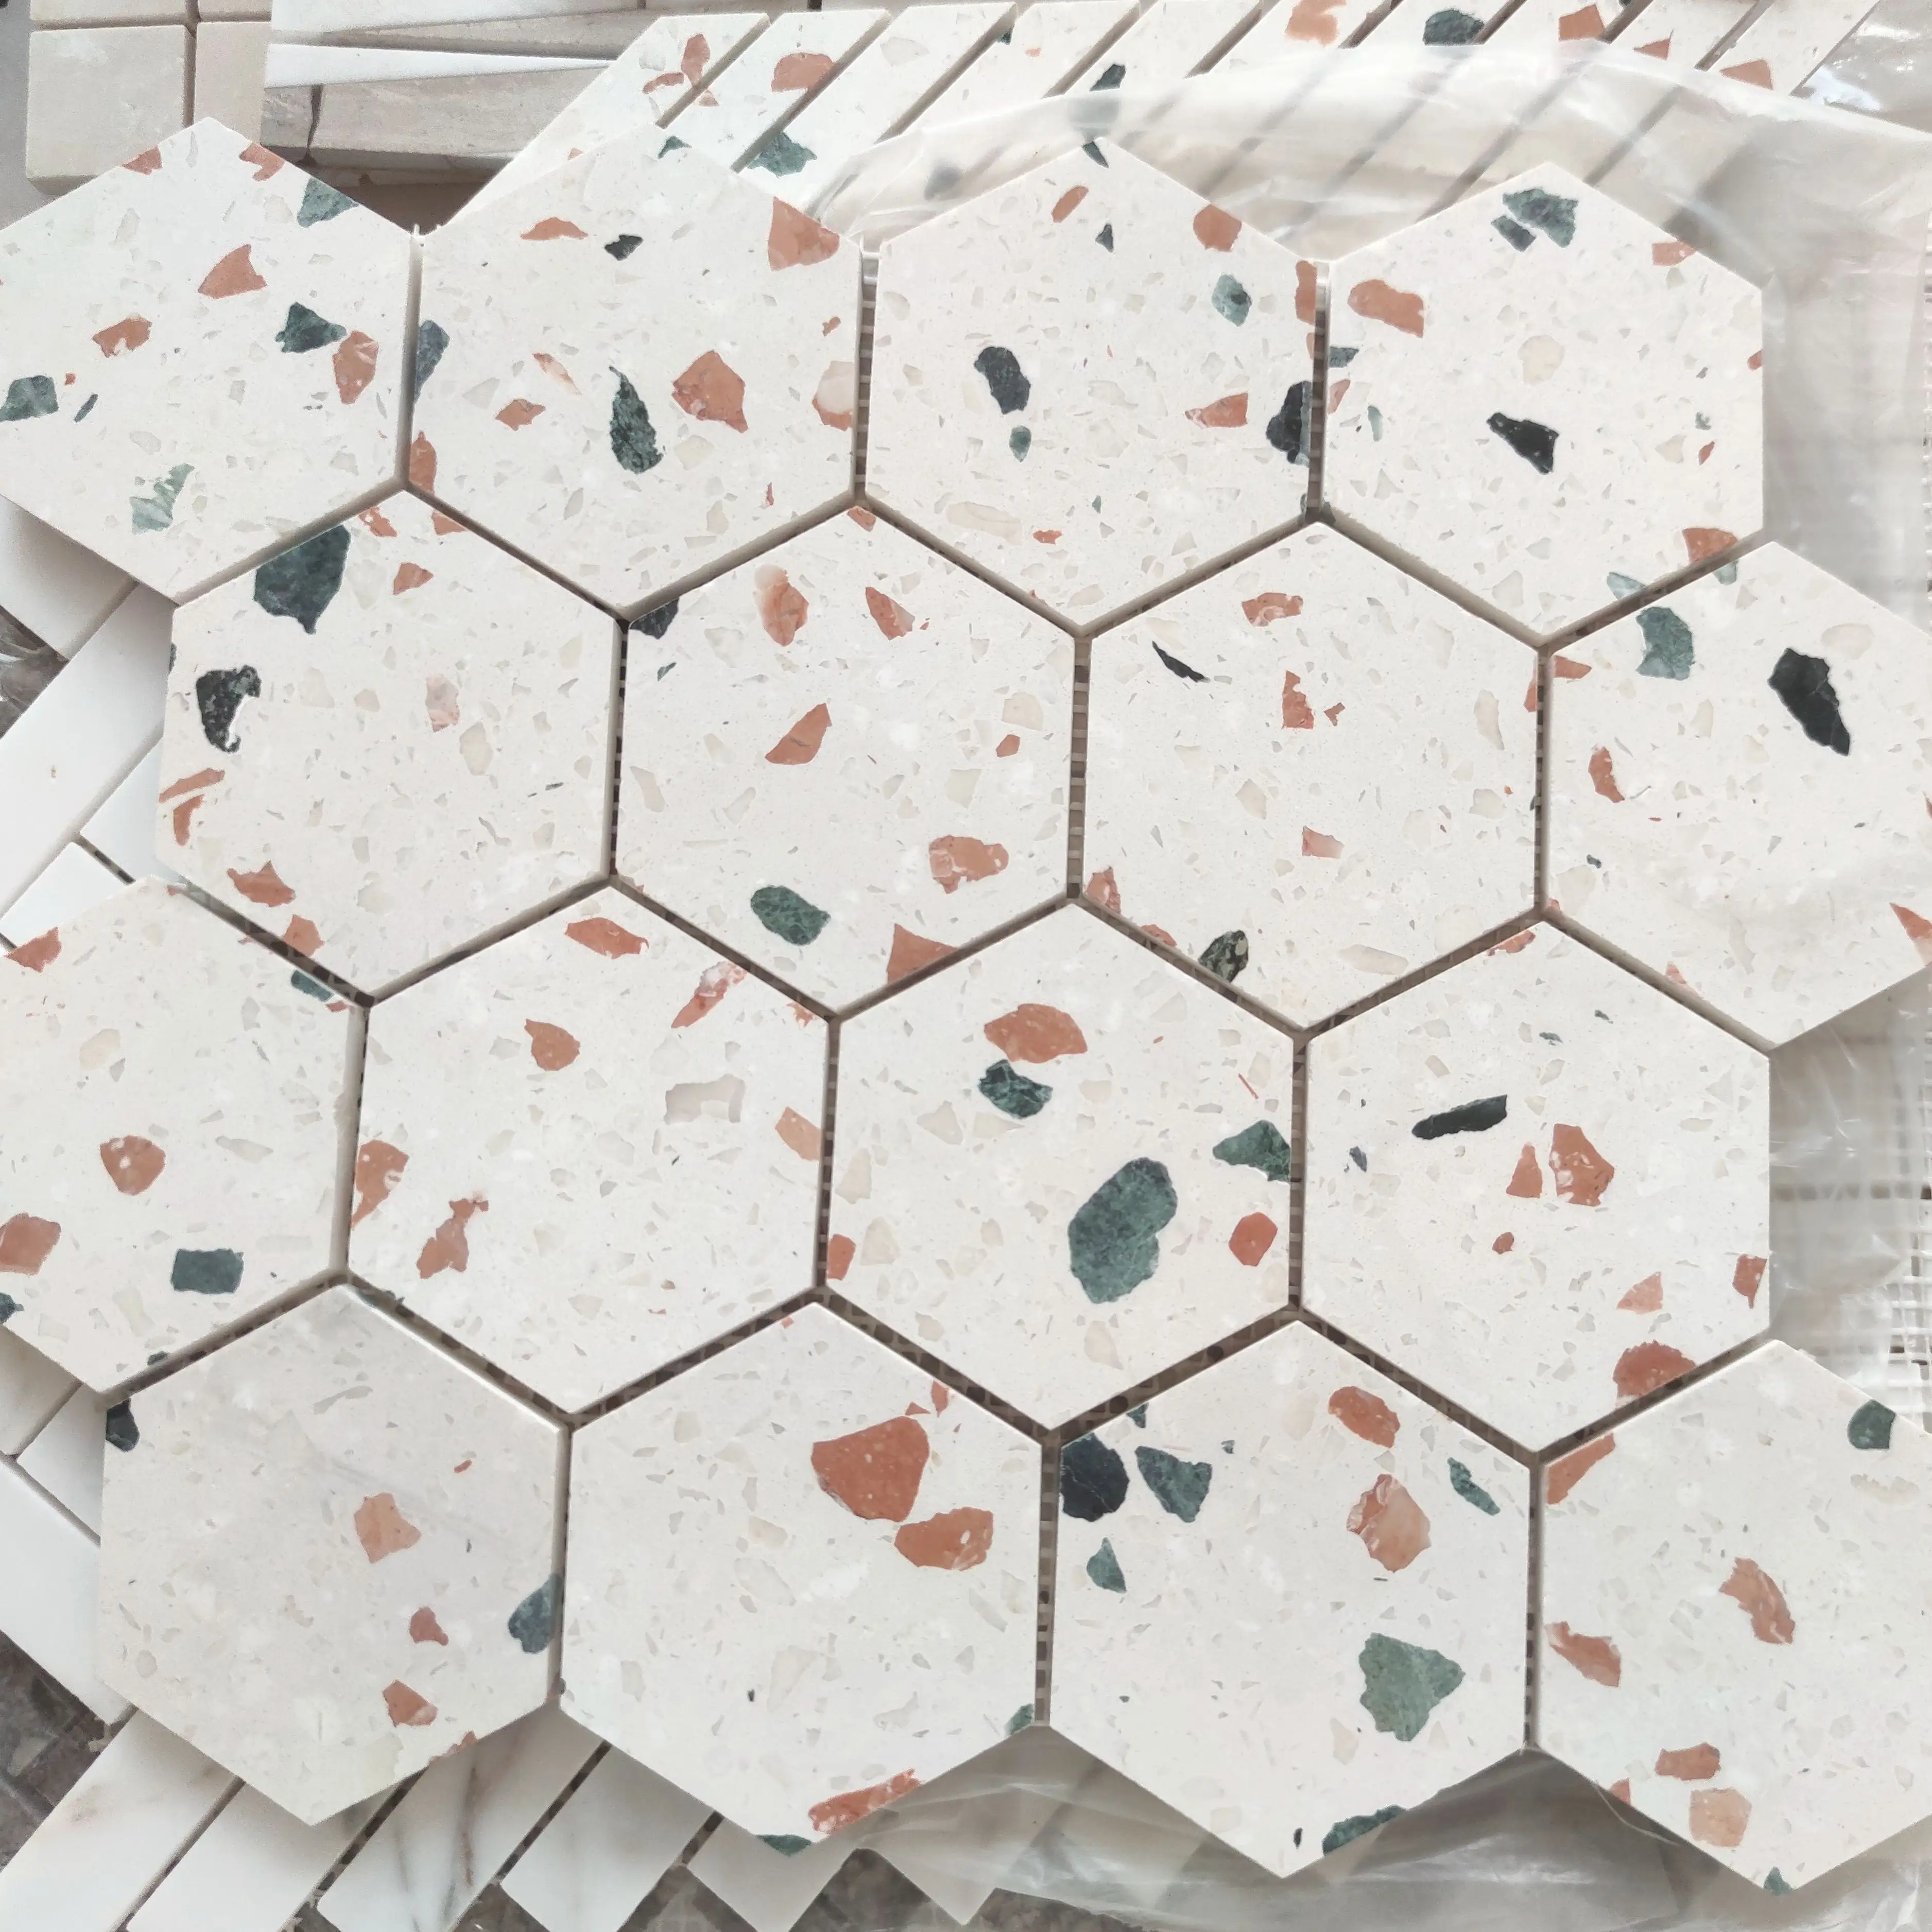 Irregular Shape Colorful Terrazzo Look Mosaic Tiles for Kitchen and Bathroom Wall Panels or Floor Tiles